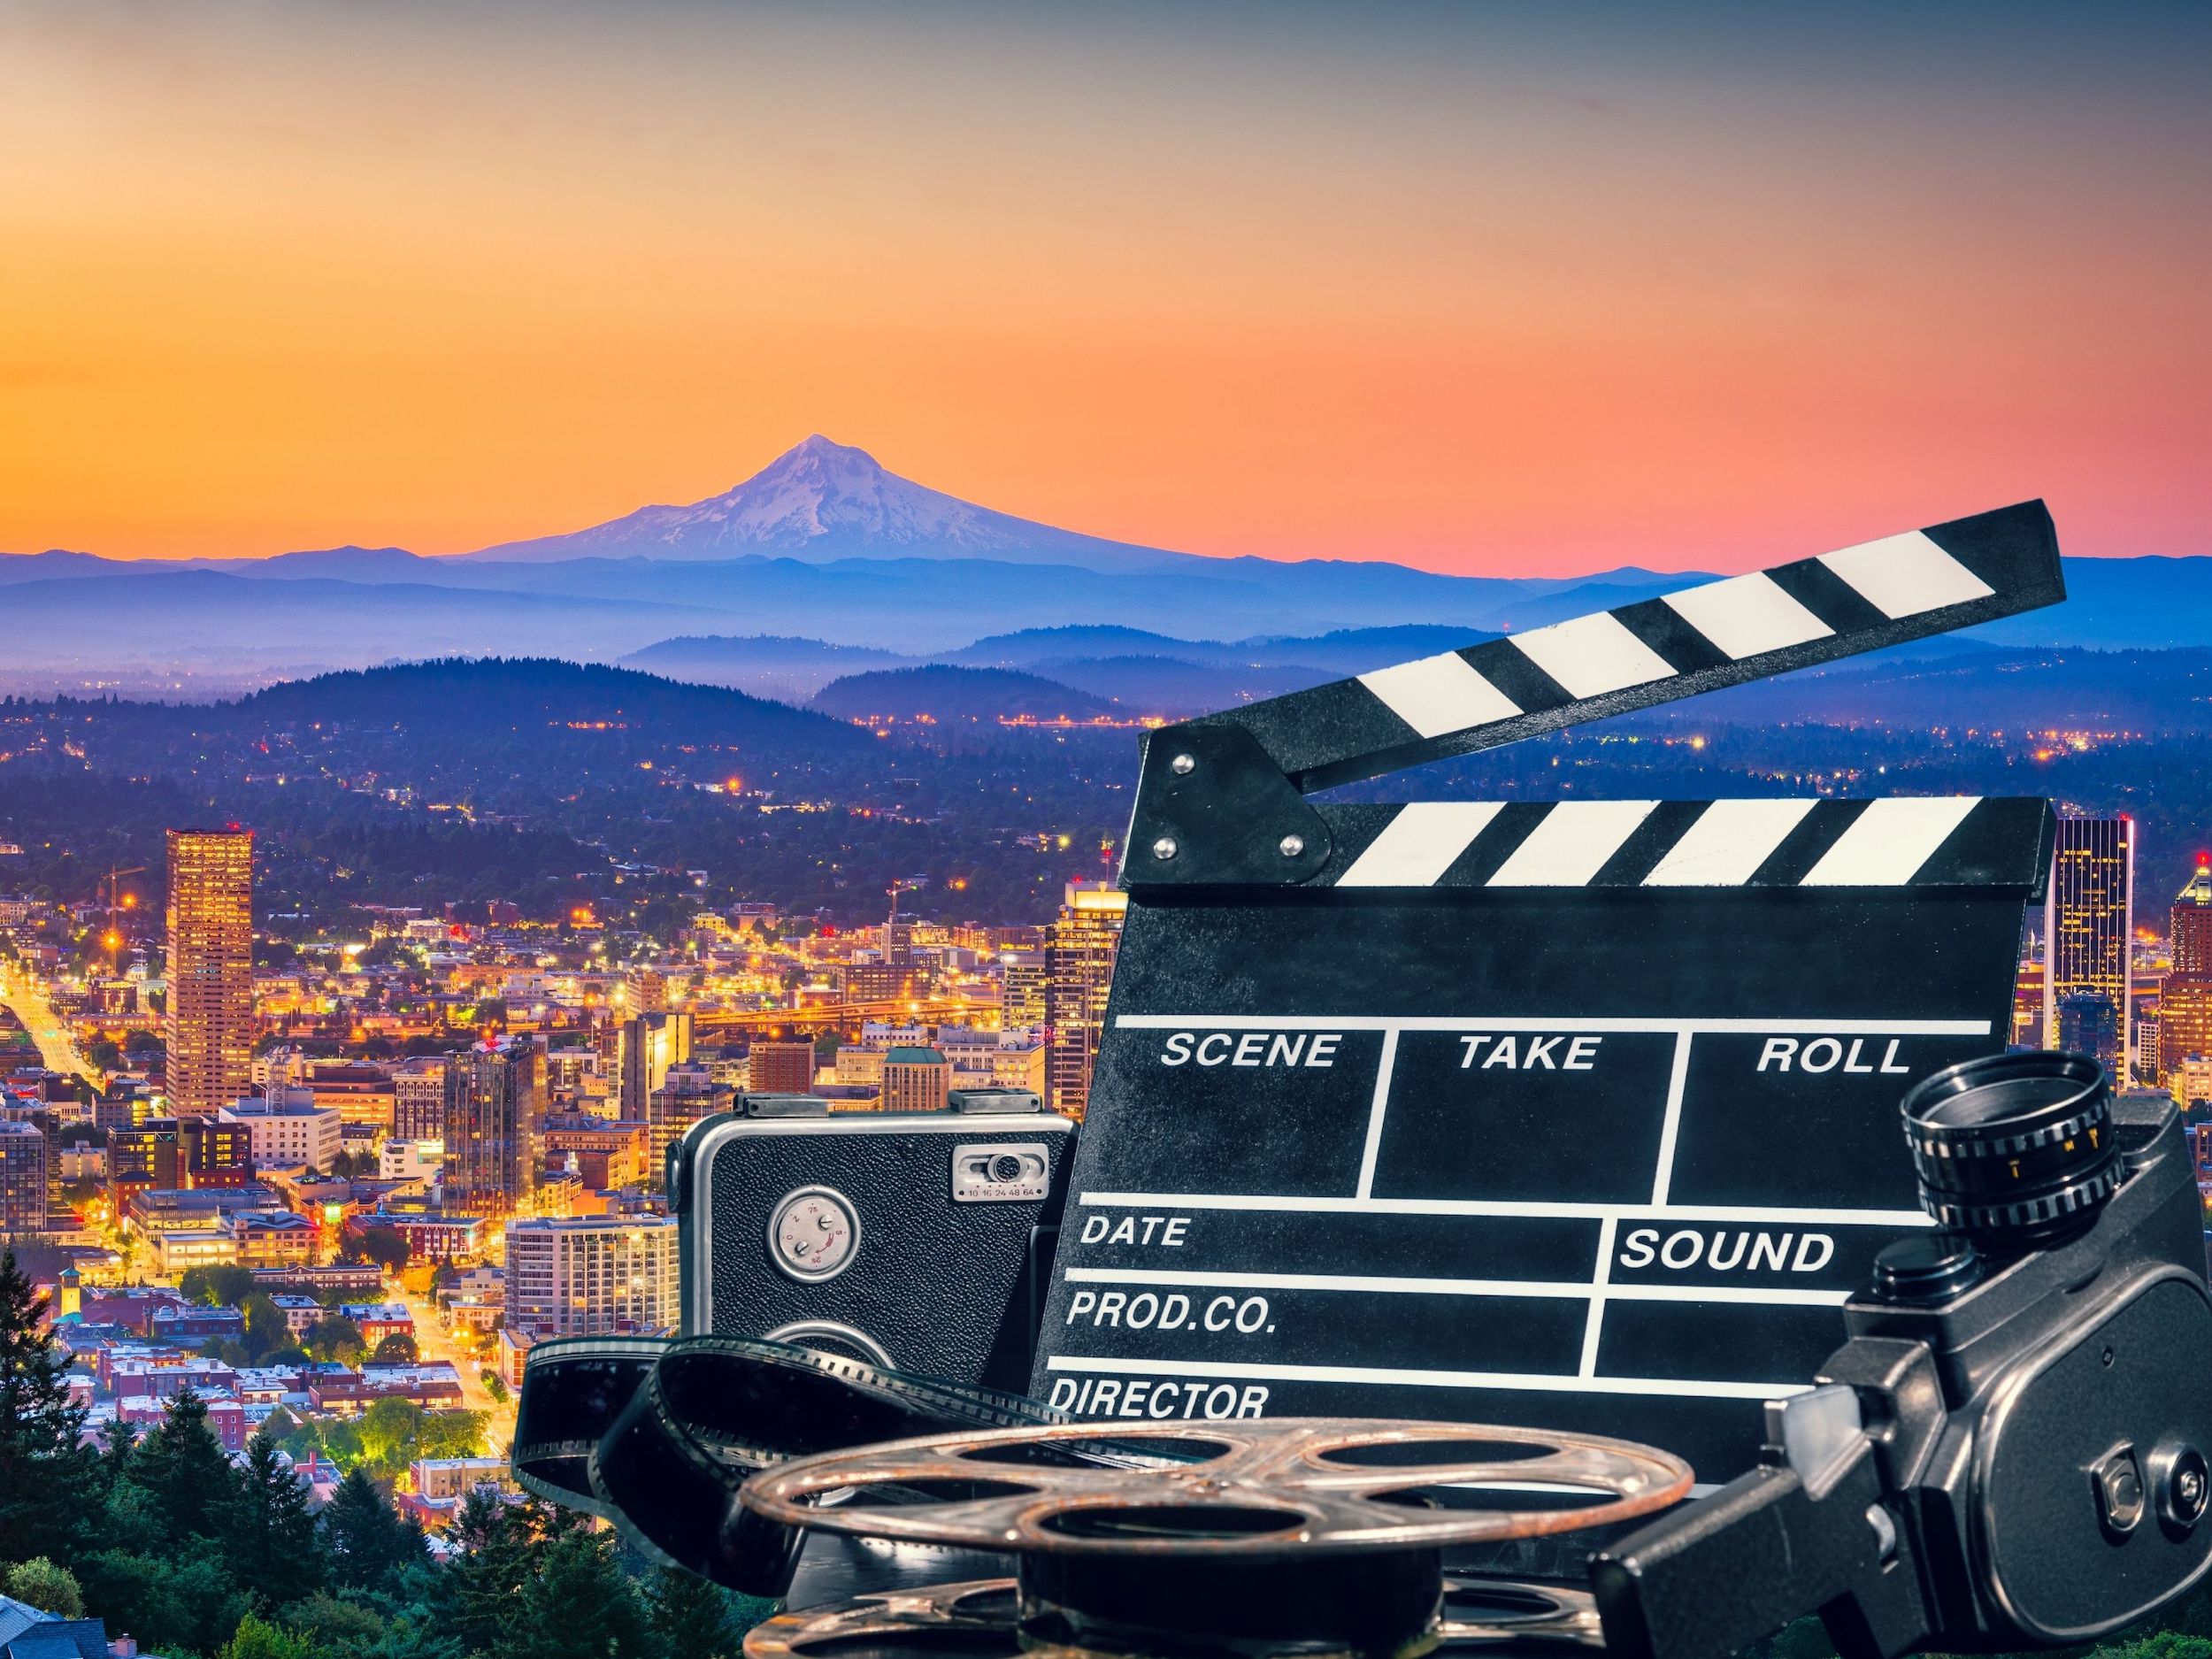 12 Extraordinary Movies Set In Oregon That Will Inspire You To Visit!